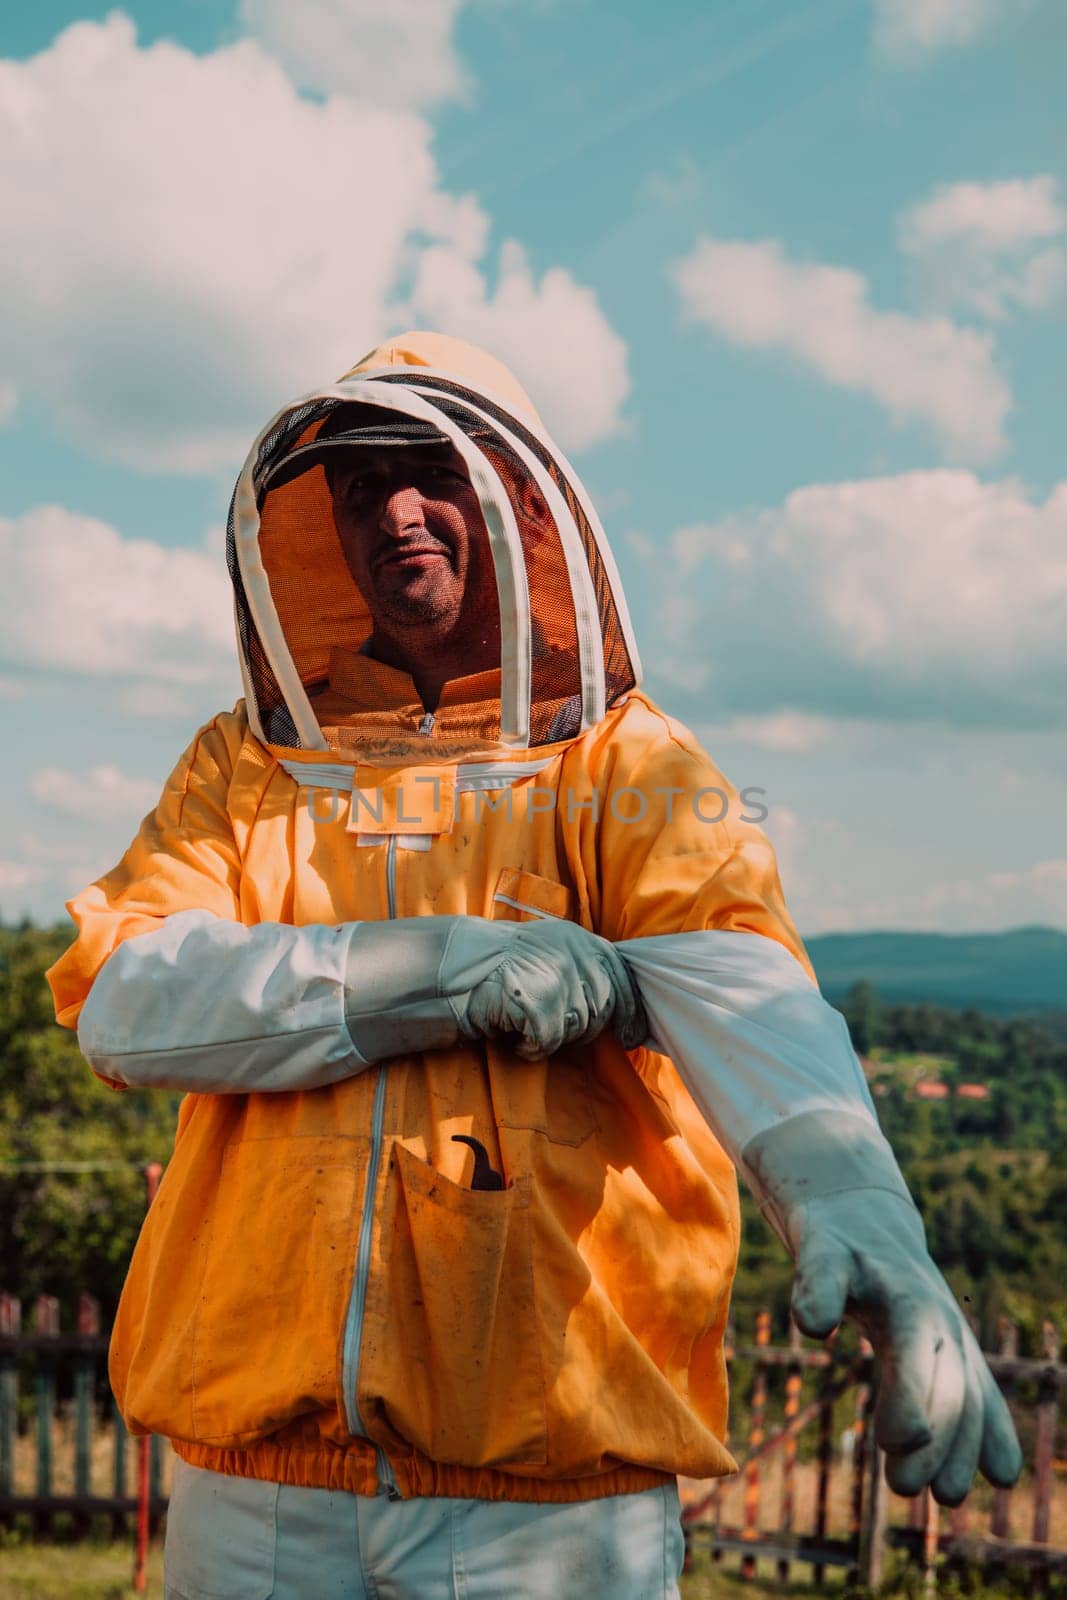 Beekeeper put on a protective beekeeping suit and preparing to enter the apiary.